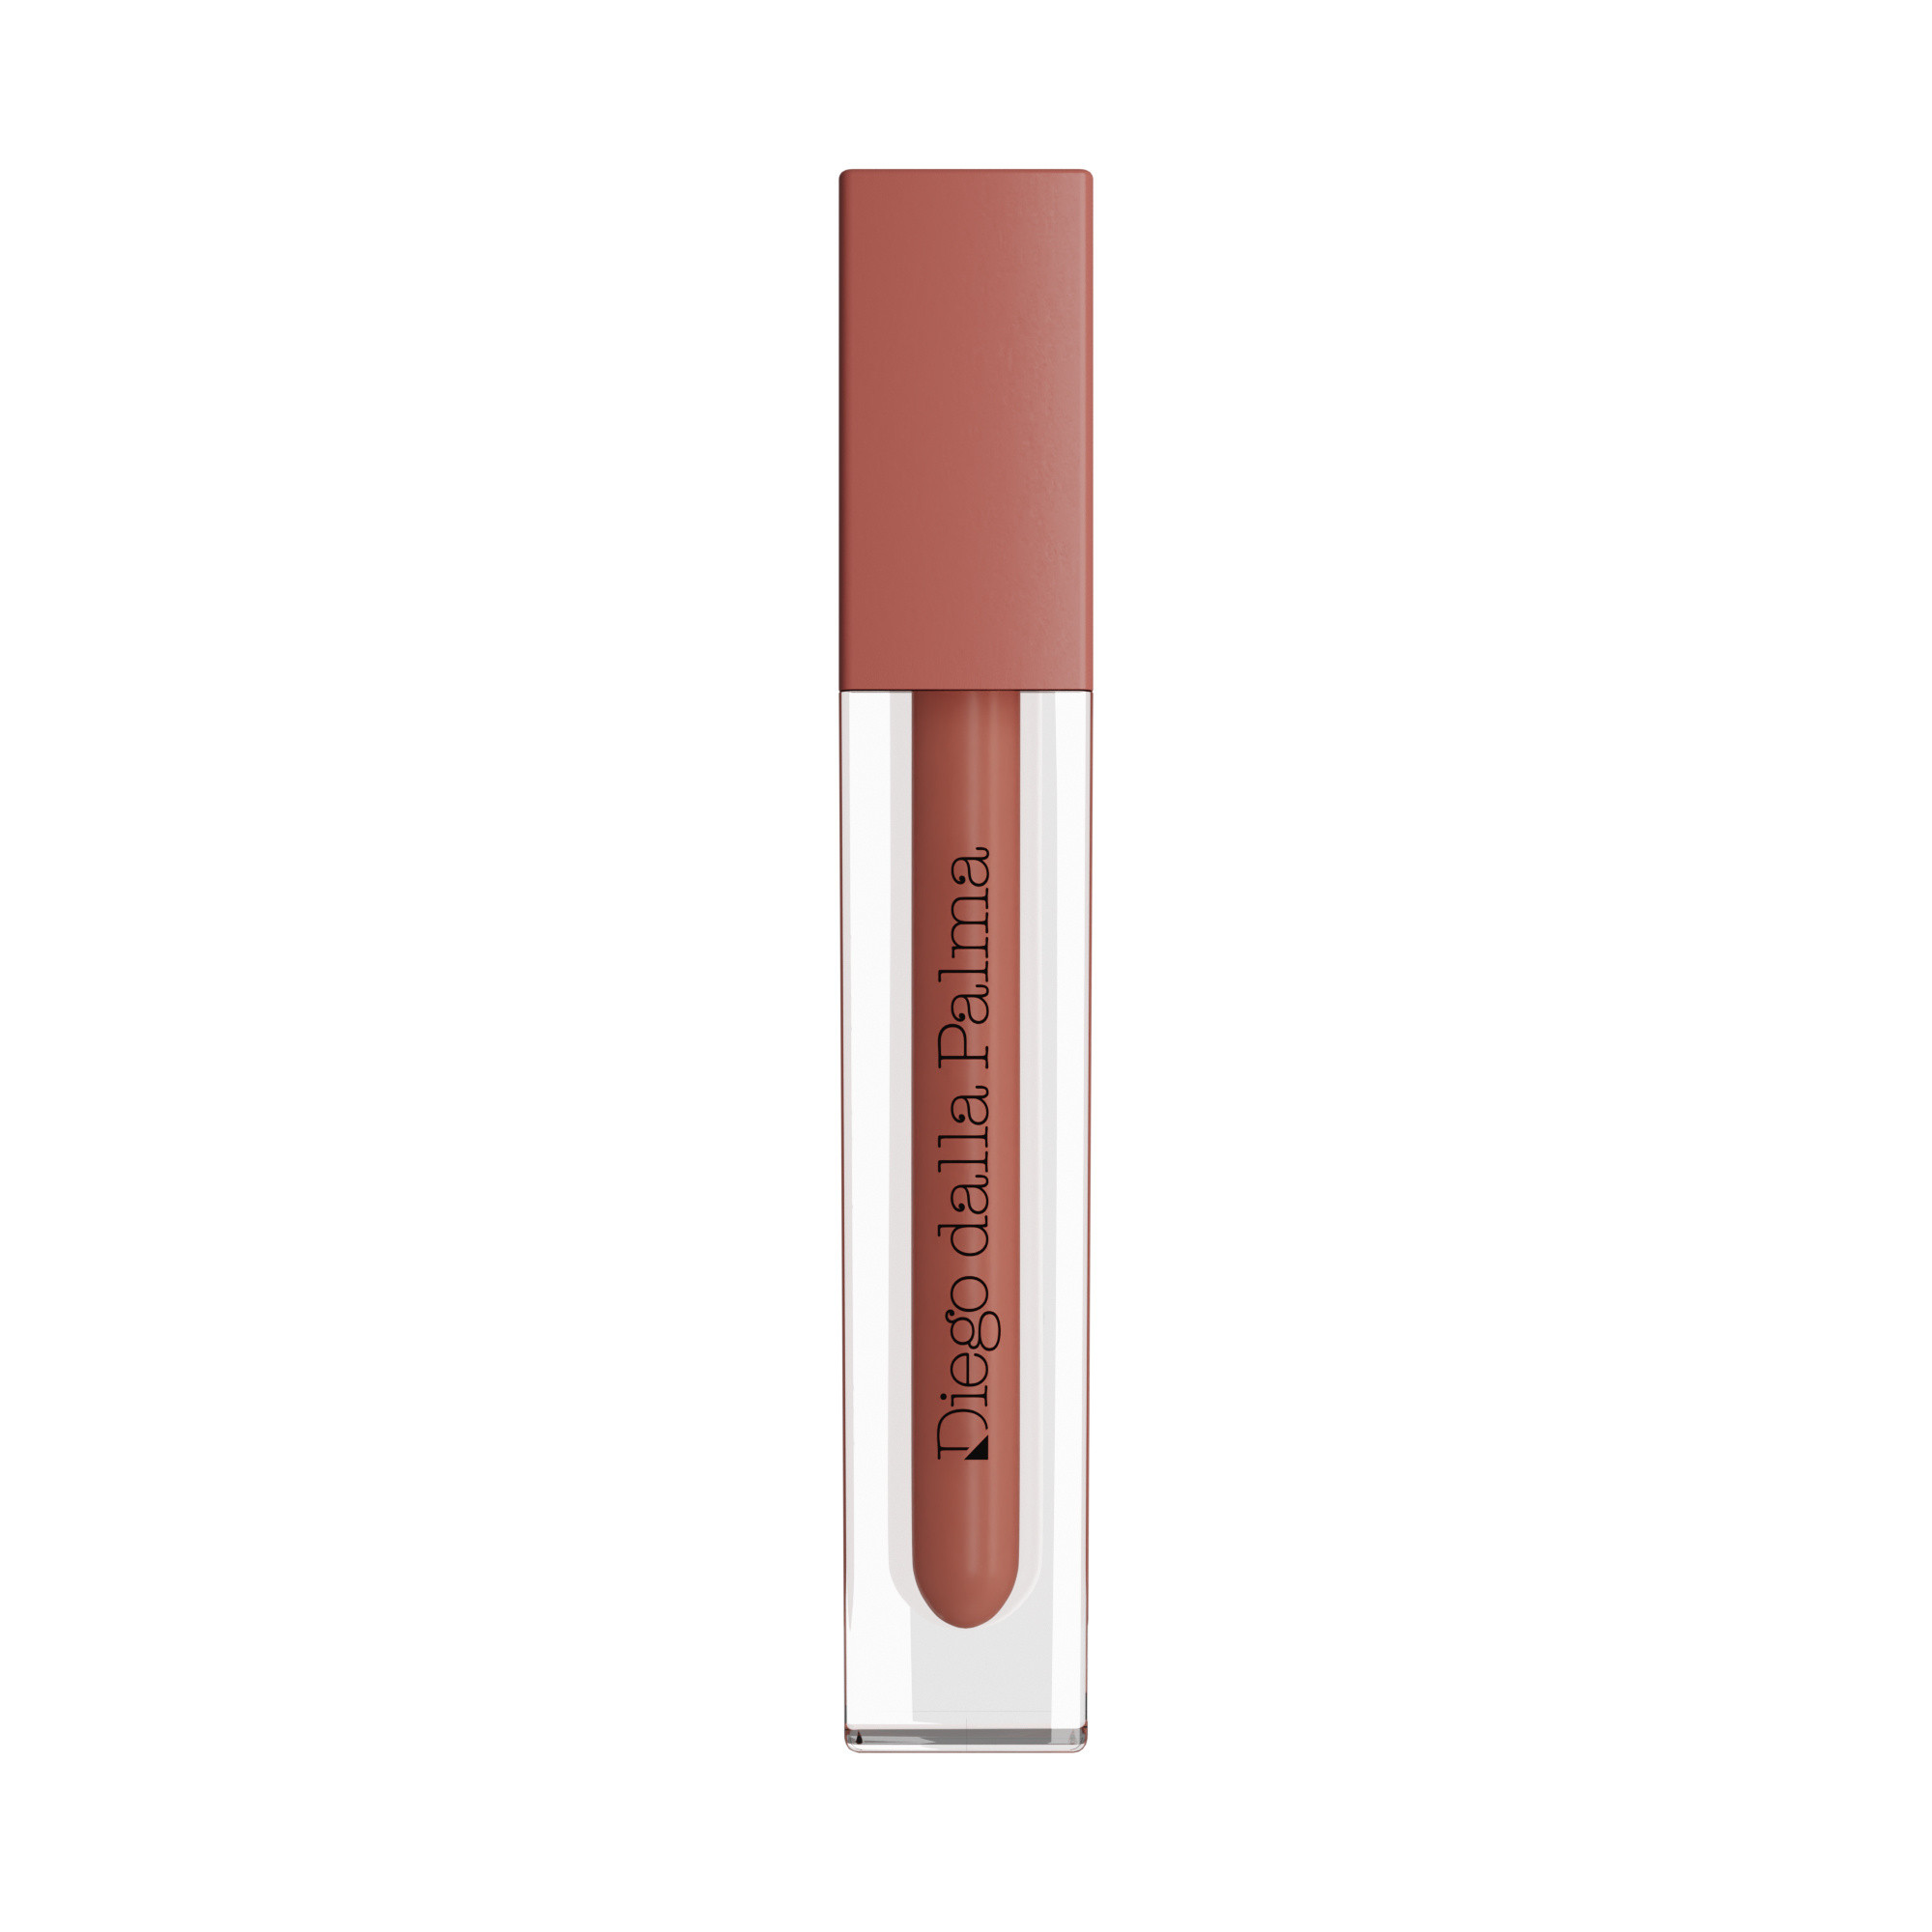 STAY ON ME - Long-Lasting Liquid Lipstick - 34 Terra di Siena, Light Brown, large image number 0